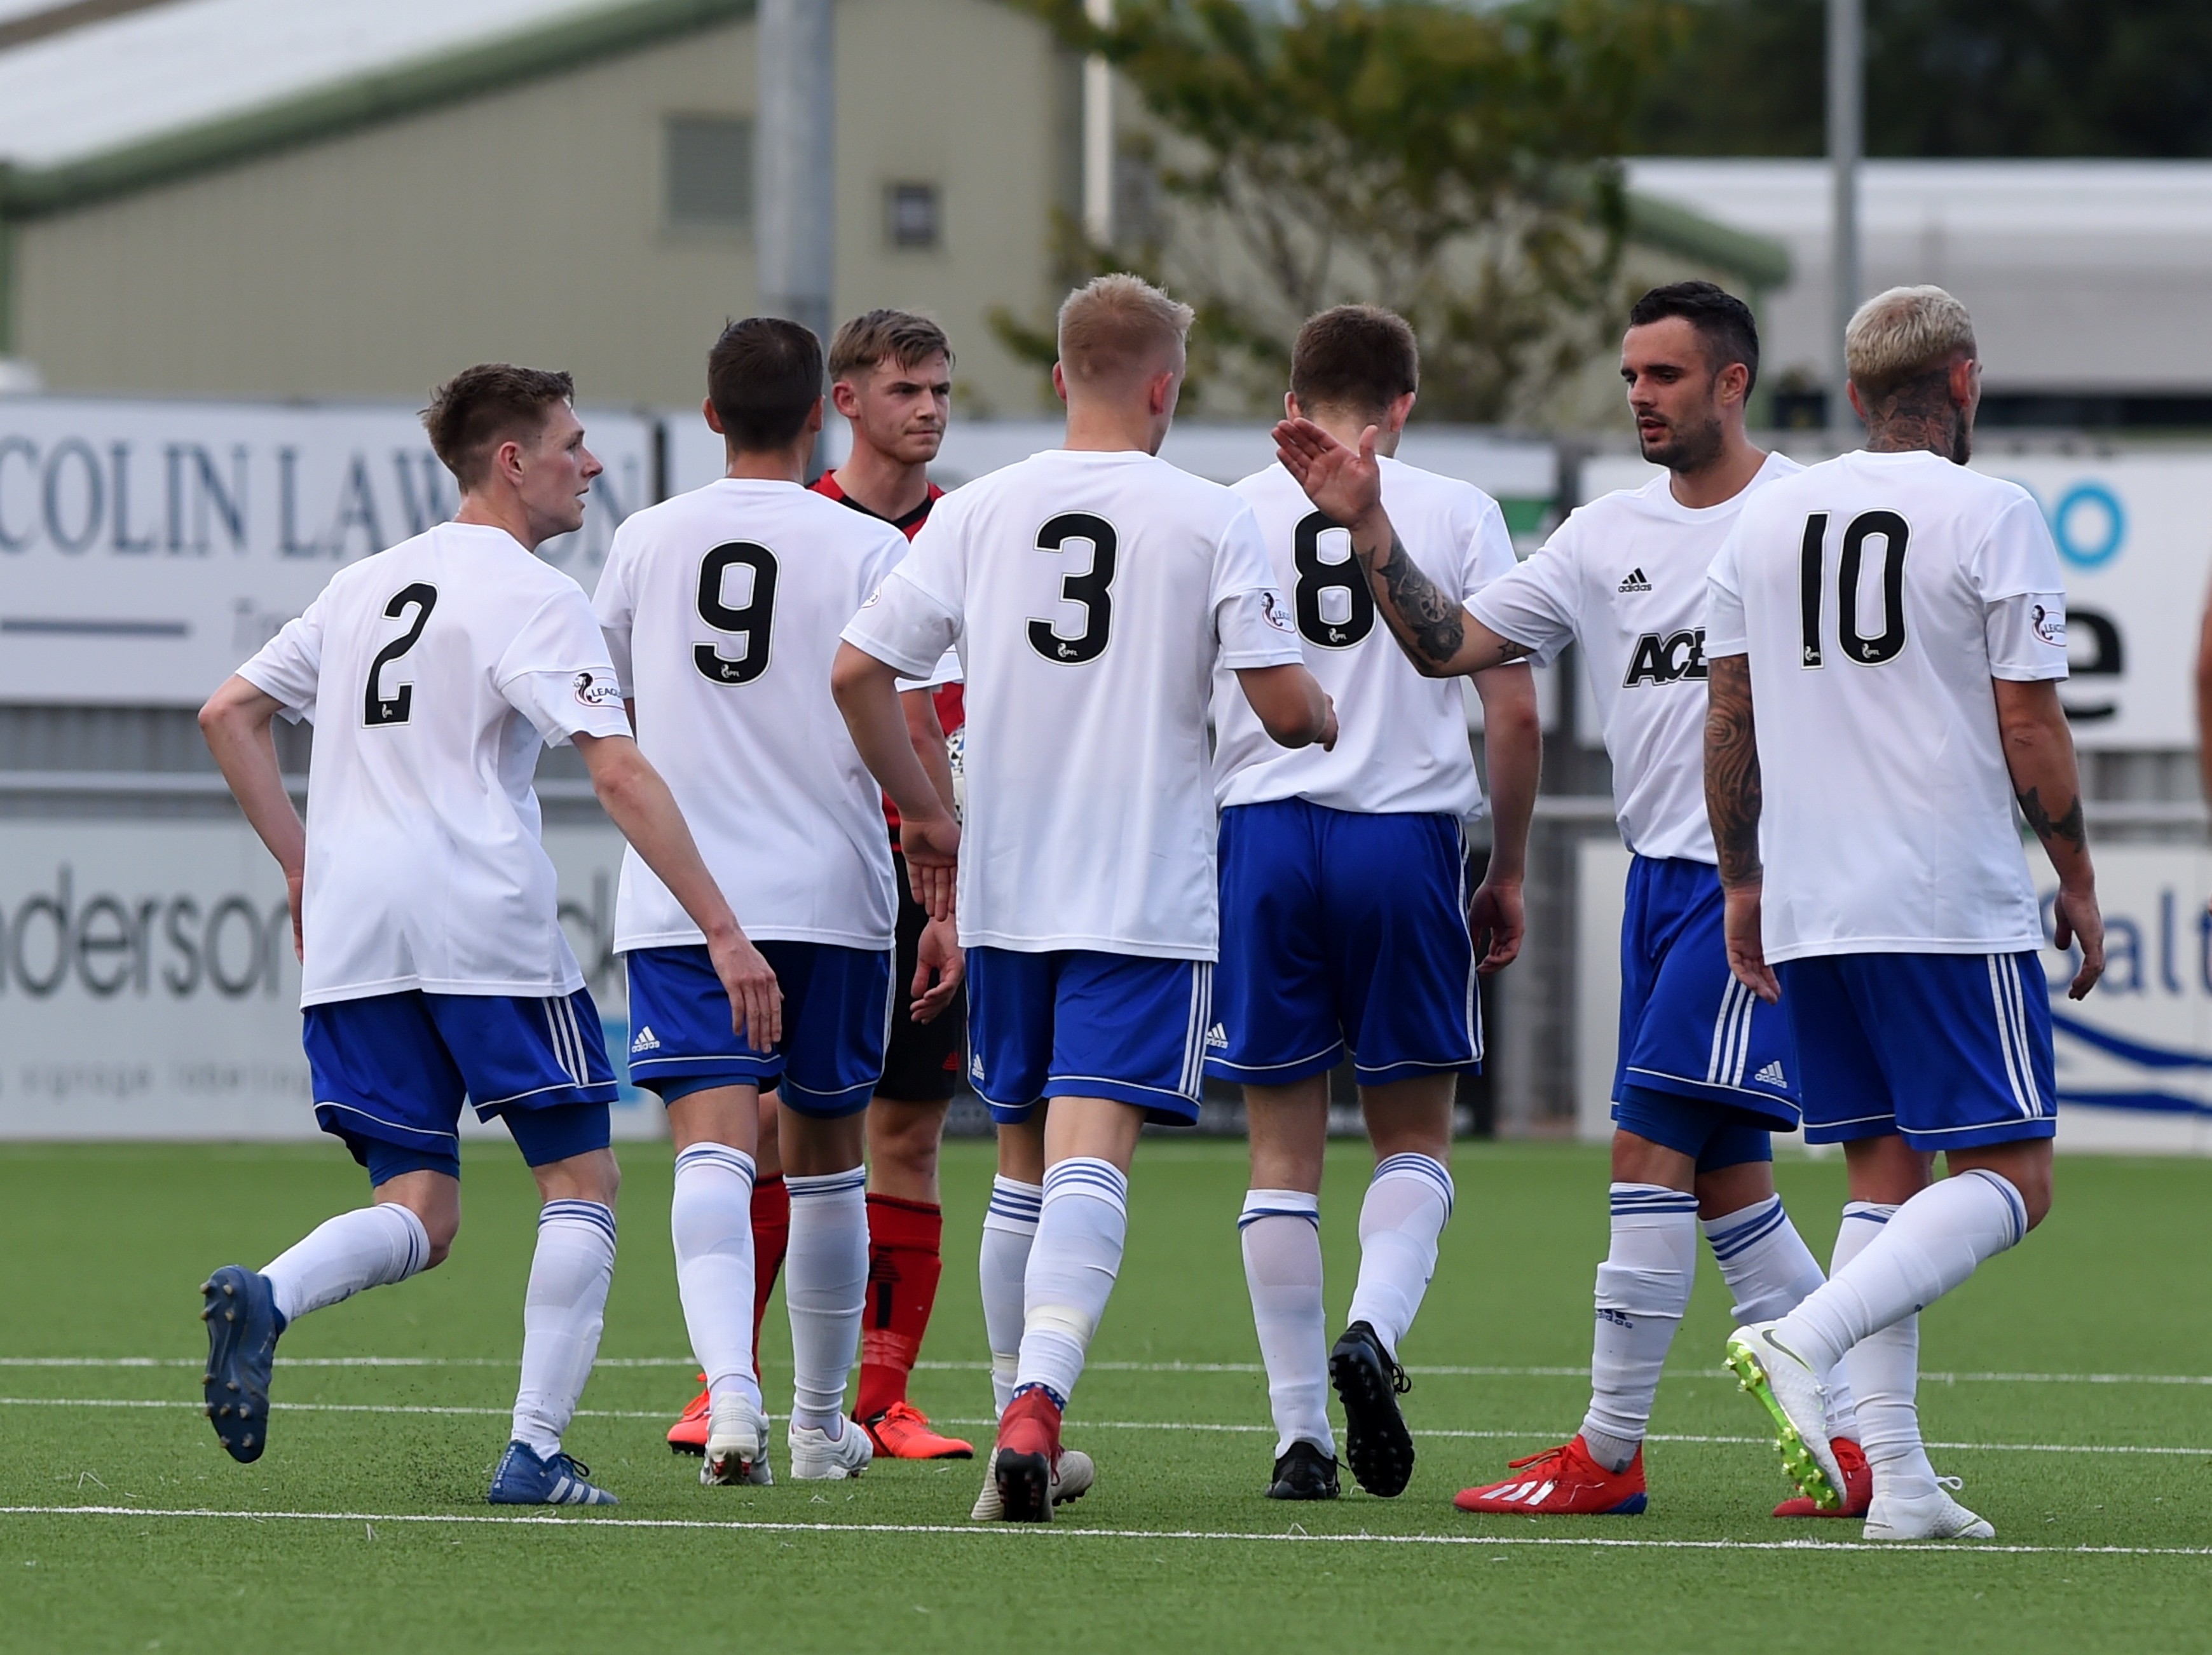 Cove Rangers will make their SPFL debut next month.